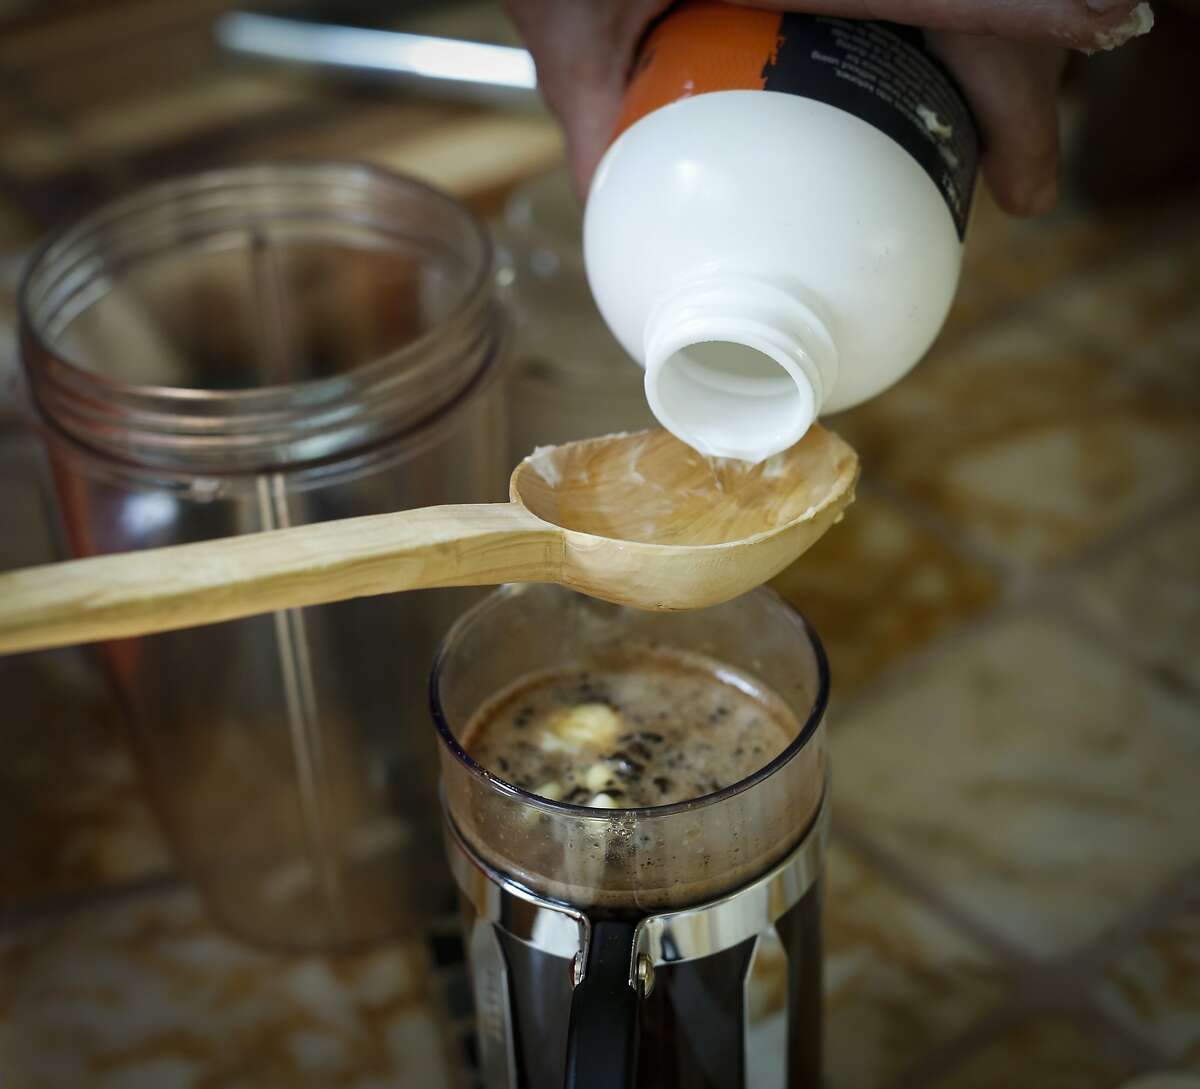 2. Bulletproof coffee, the "Silicon Valley superfood."